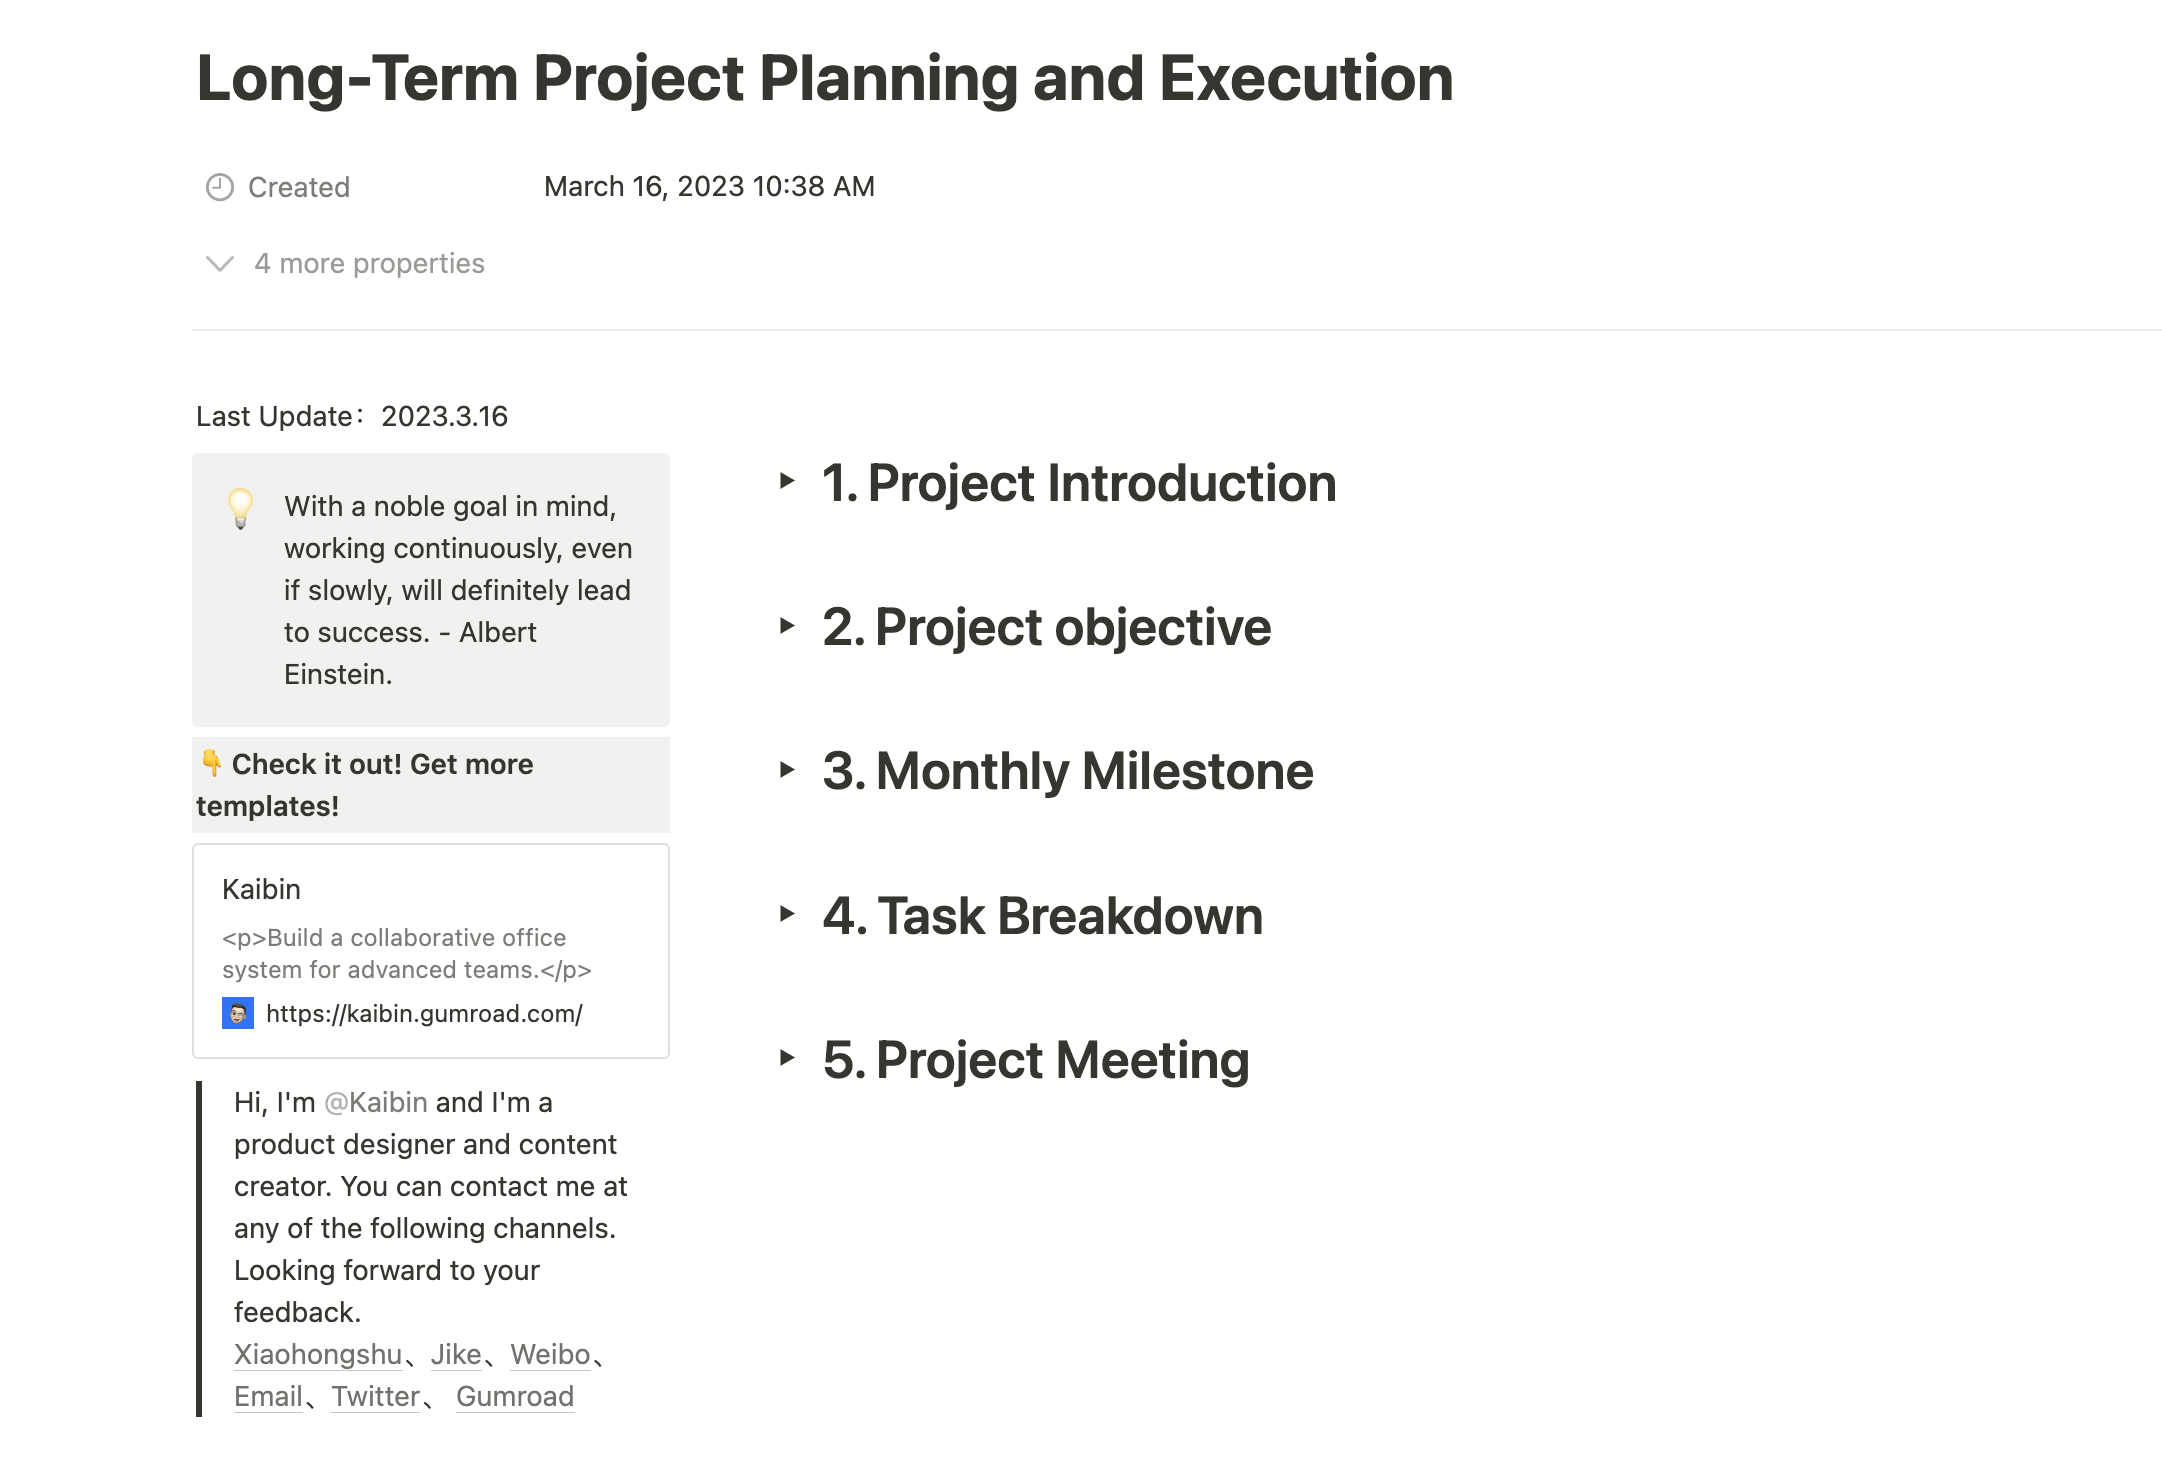 Long-Term Project Planning and Execution template